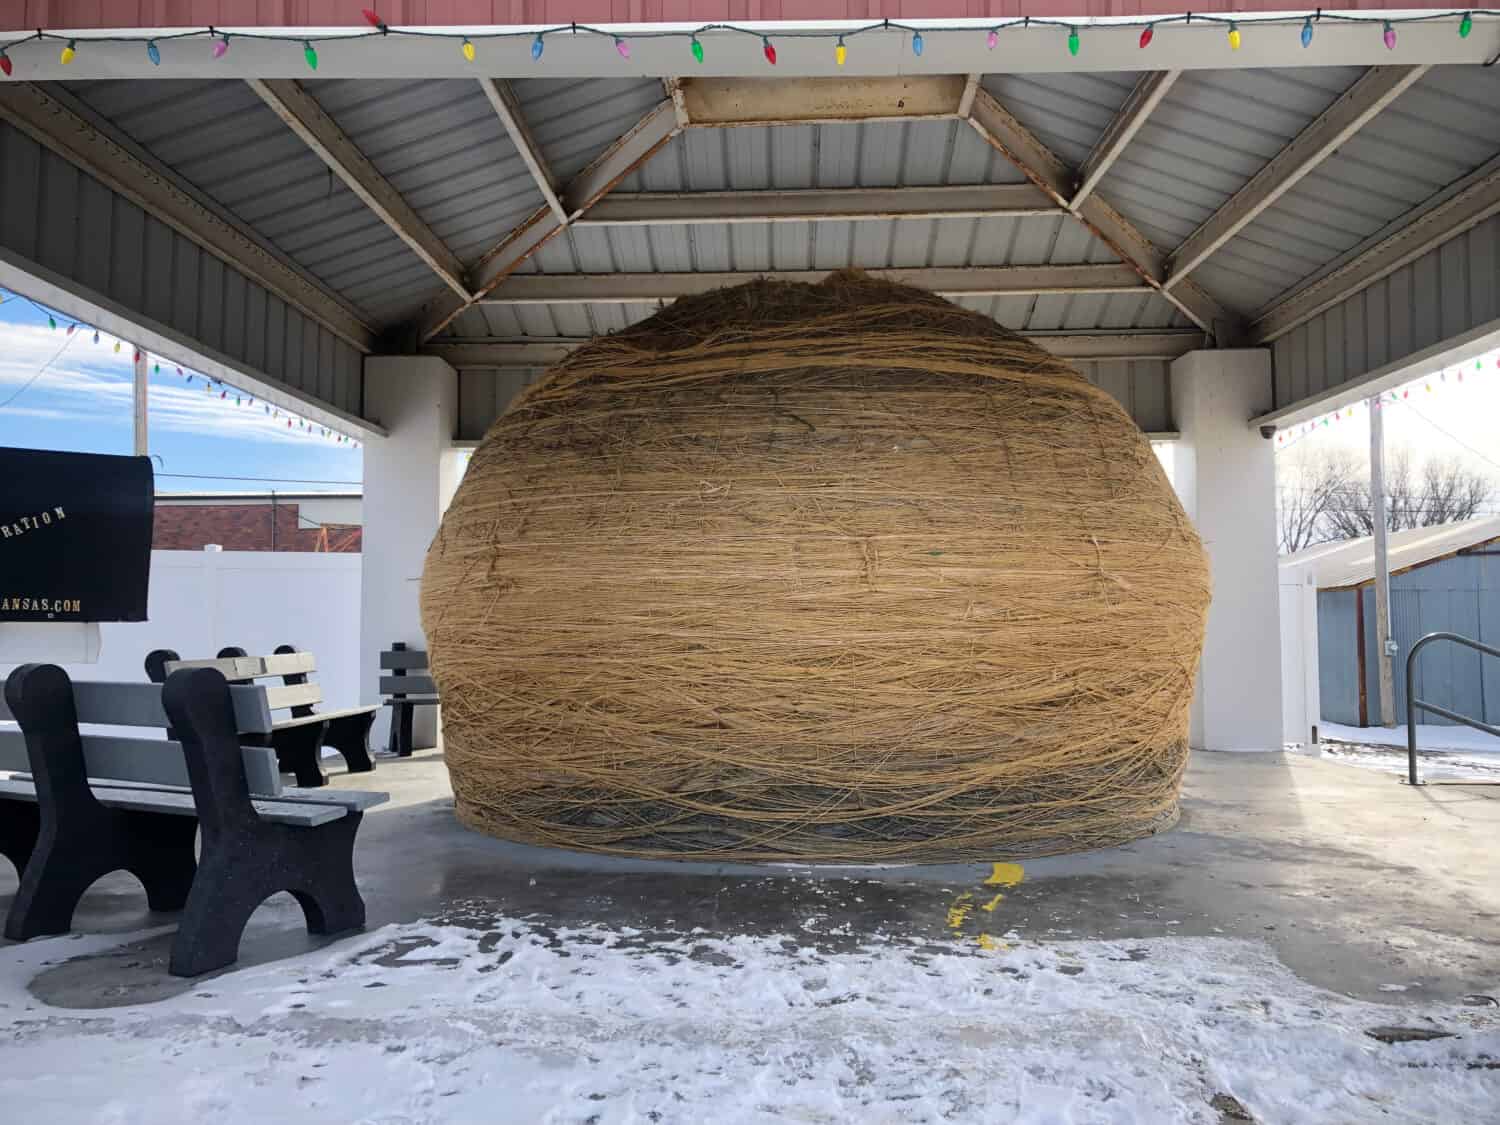 Twine Largest Ball of Twine